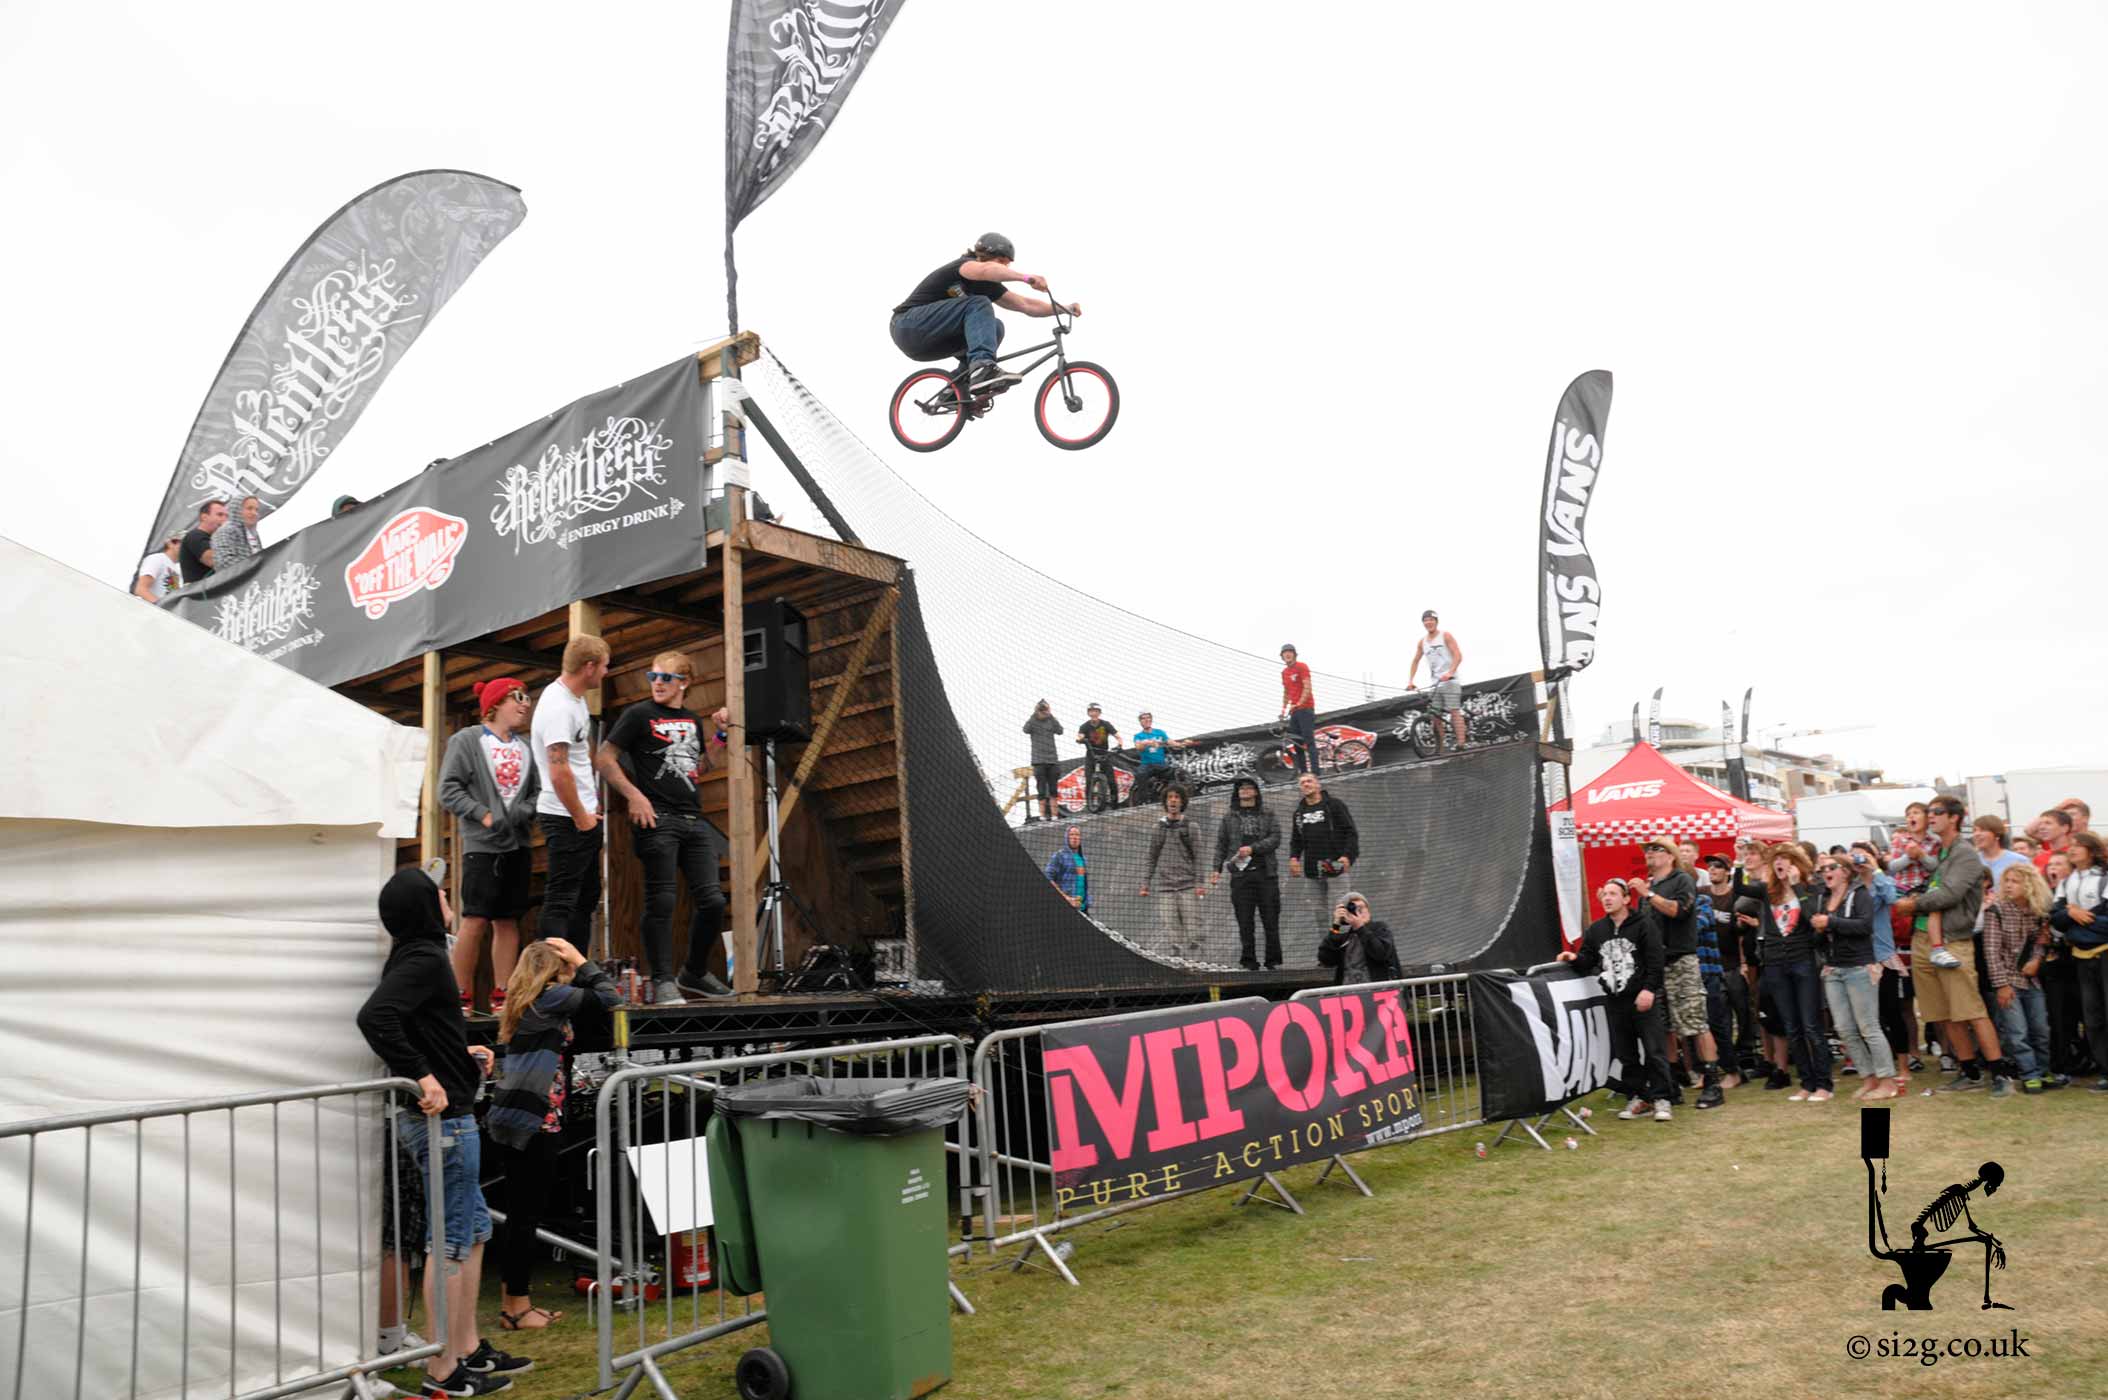 Insane BMX Transfer to Floor - Competing to win Best Trick at Newquay Boardmasters, this BMX Rider entertains the crowds with an insane transfer from the top of the ramp down to the grass.  This craziness happened unannounced and I happened to capture the photograph whilst queuing for my lunch at the burger van.  In this case the burger van was the right place a the right time.